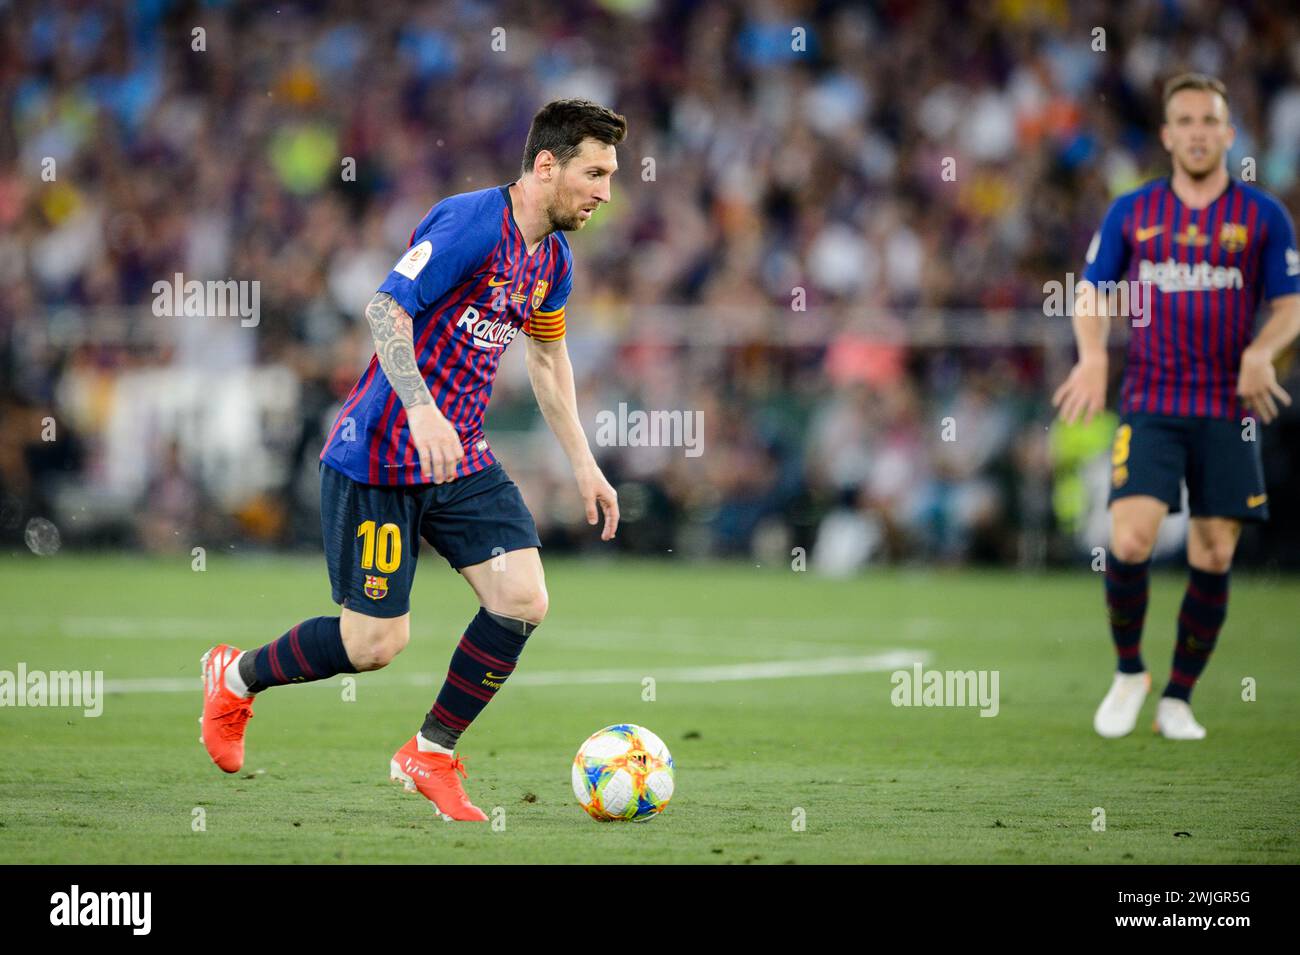 FC Barcelona's Leo Messi player in action with the ball at his feet during the Copa del Rey Final in Seville, Spain. Stock Photo